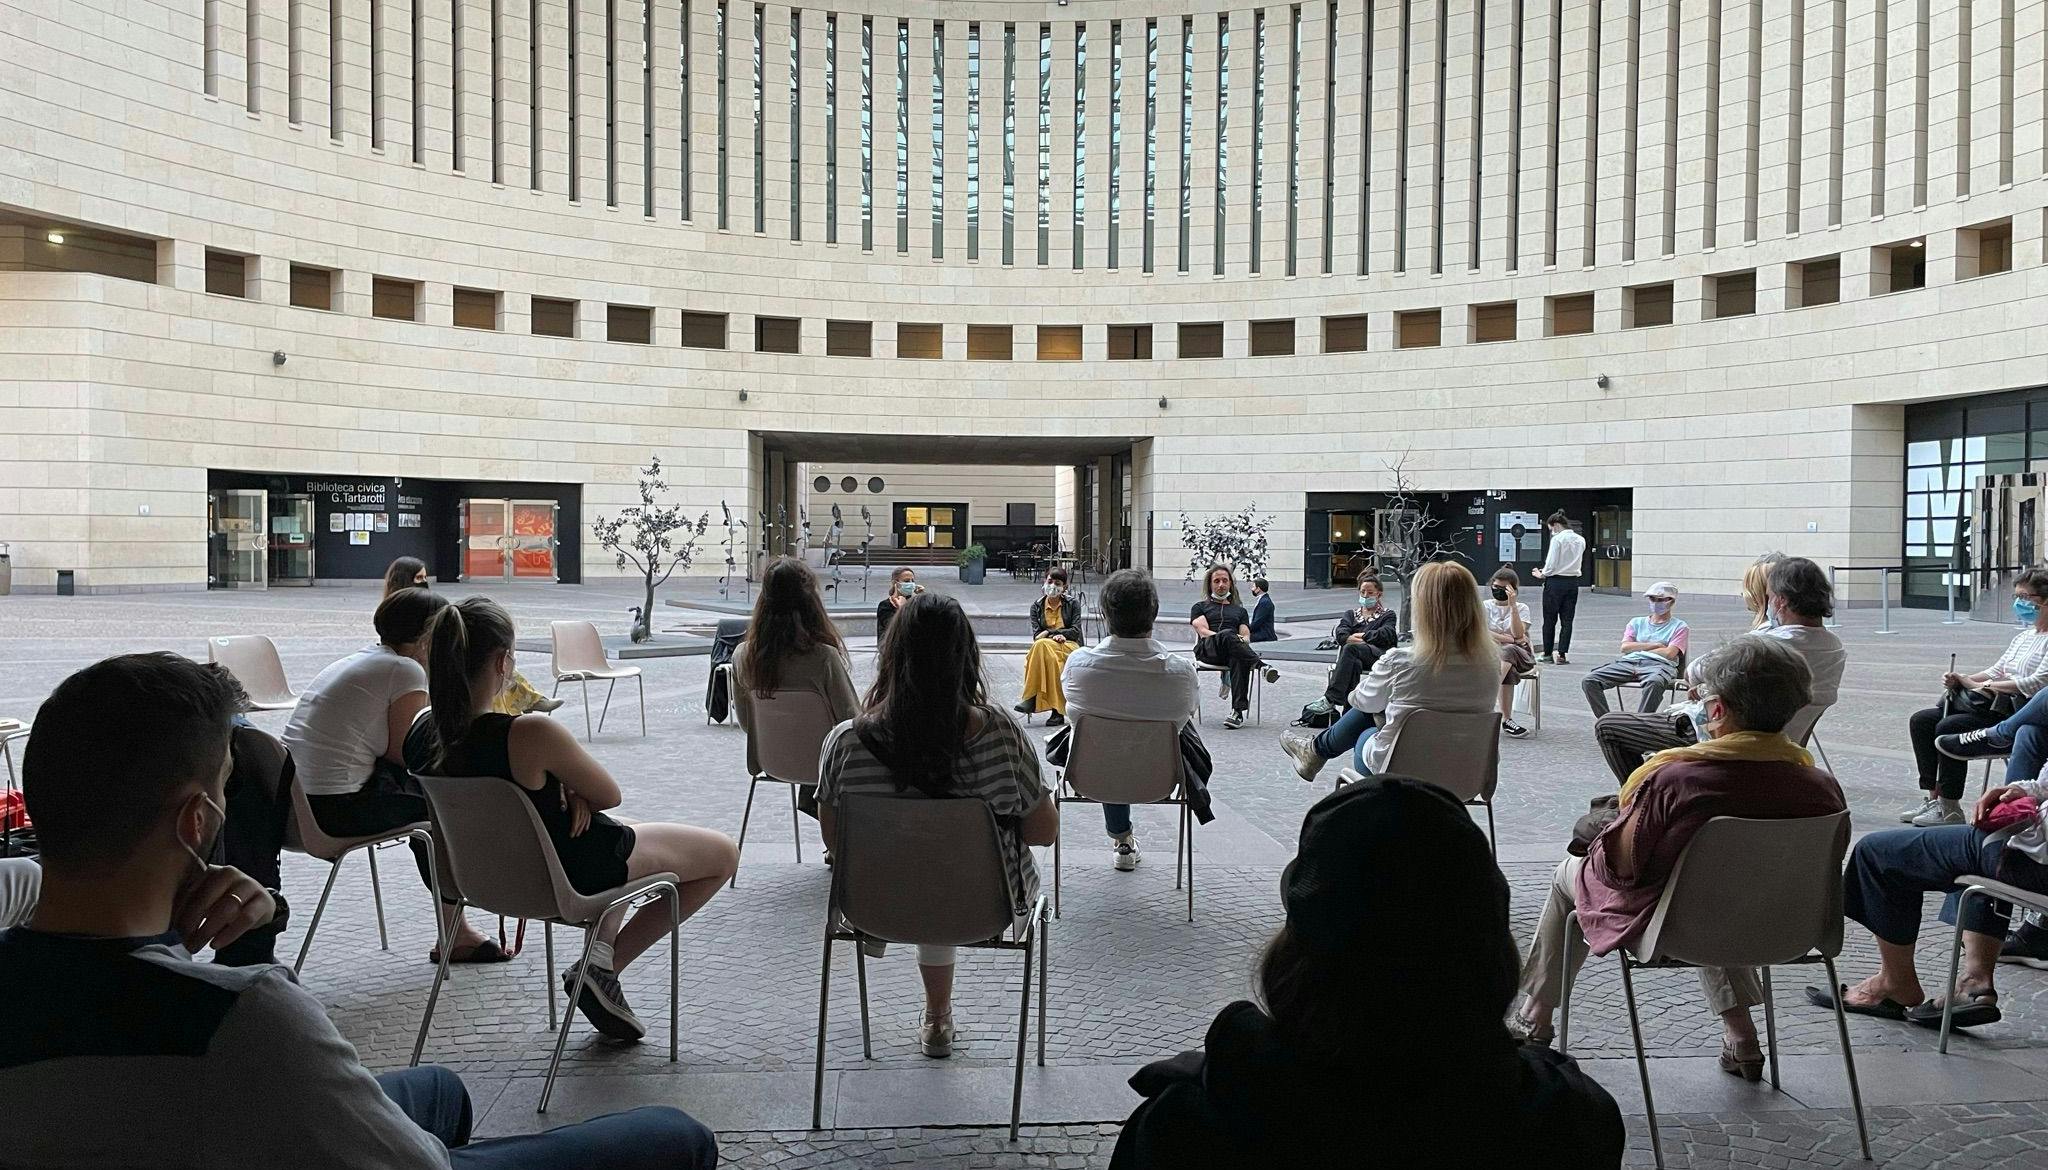 Listening point for "Dimmi cosa vuoi vedere" in the Mart square in Rovereto. The audience is visible from the back; facing them Marta Cuscunà and Al.Di.Qua.Artist are seated in a semicircle.